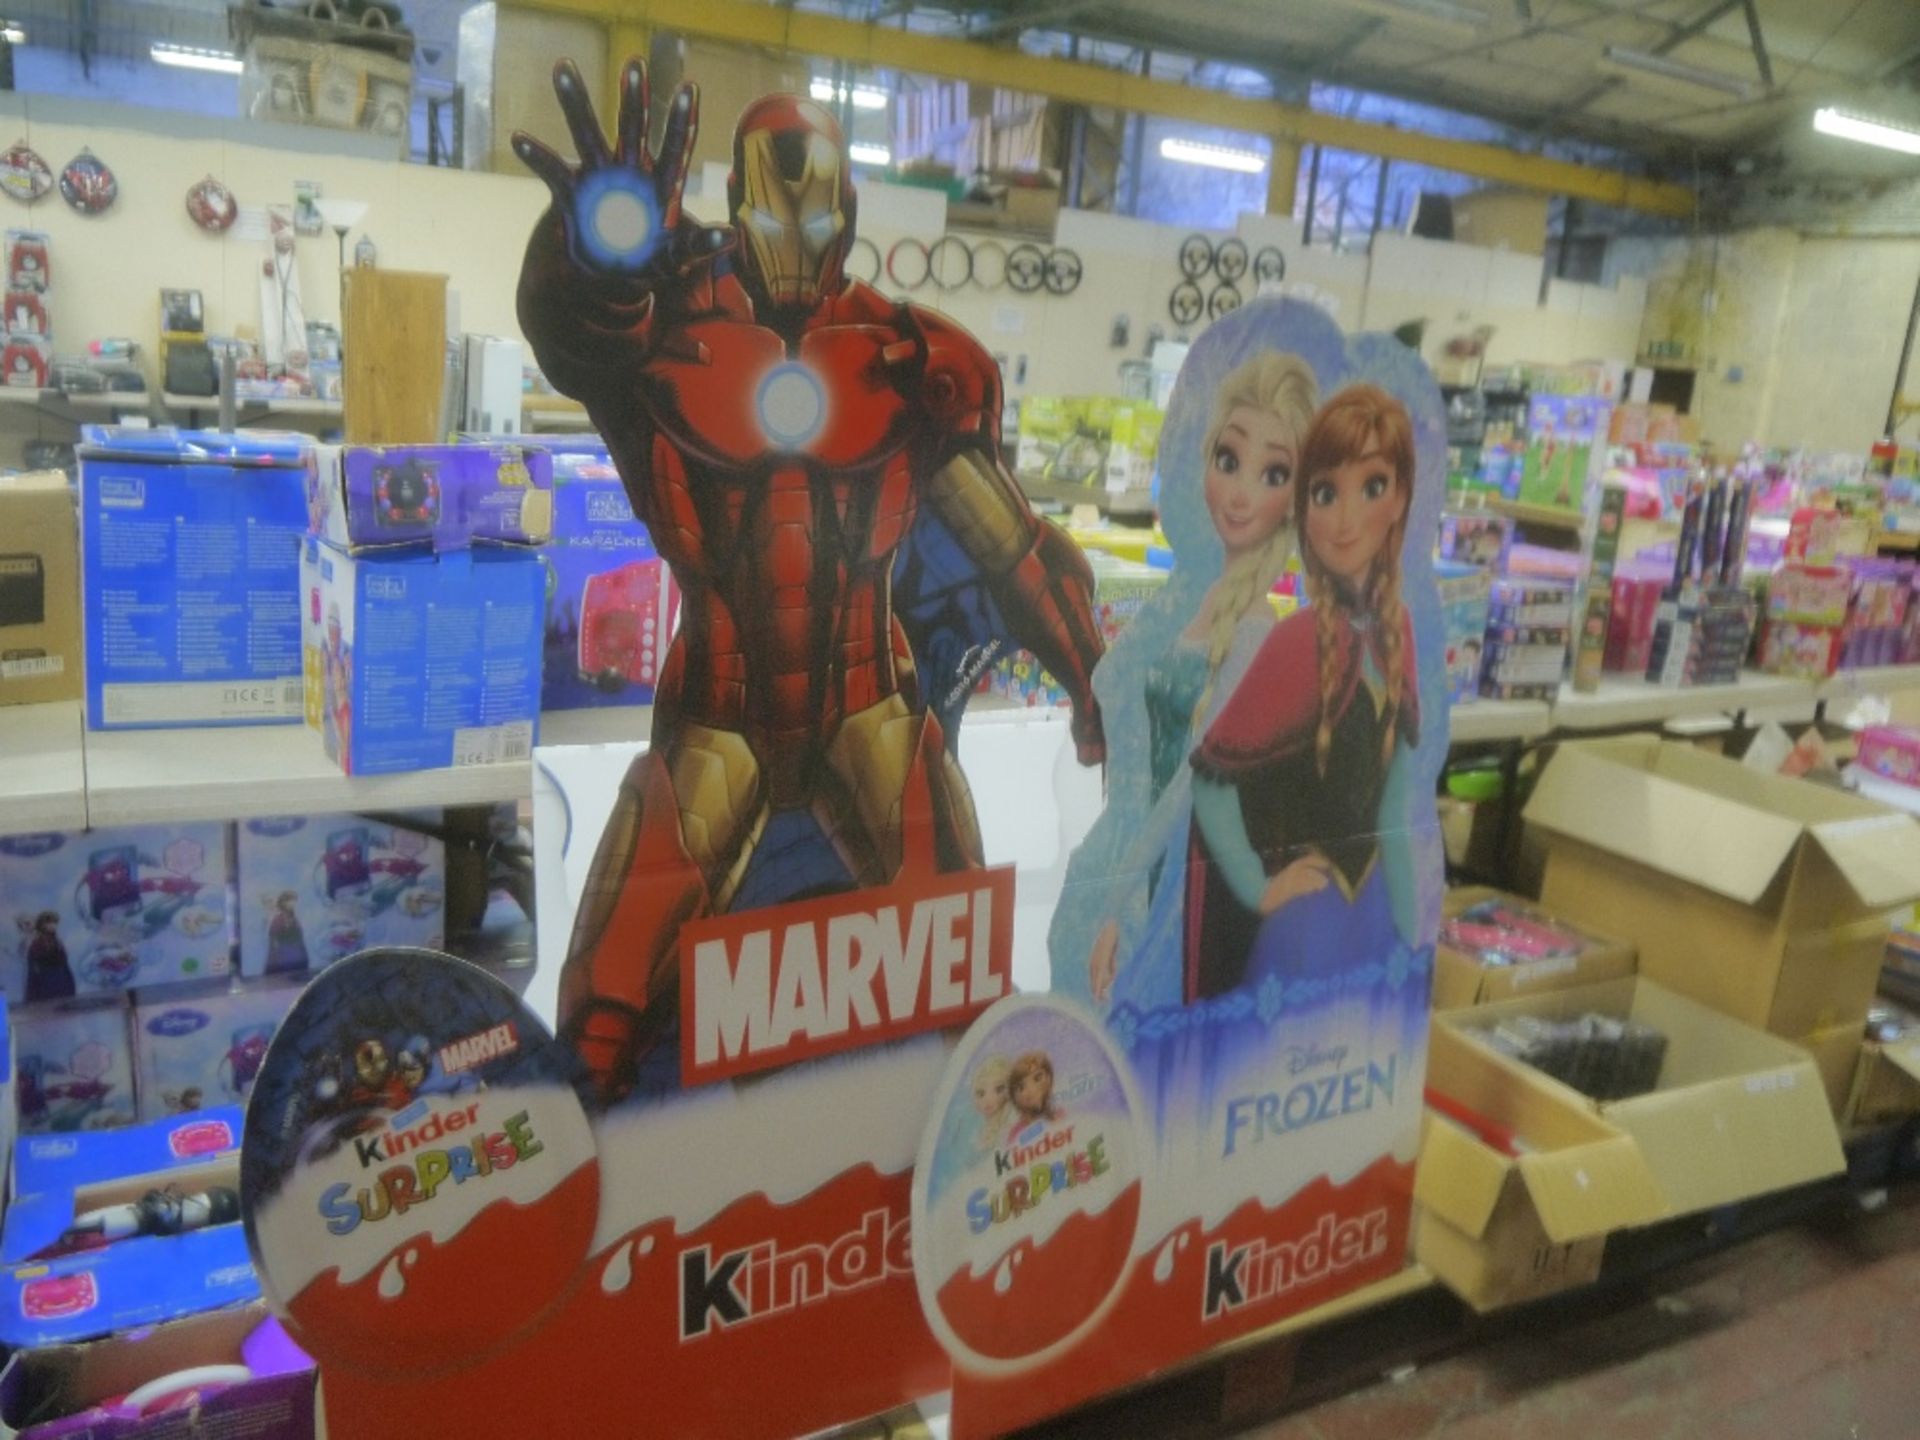 Ferrero C&C Cut Out Standees - Cardboard Cut Outs Advertising Disney Frozen and Marvel Kinder